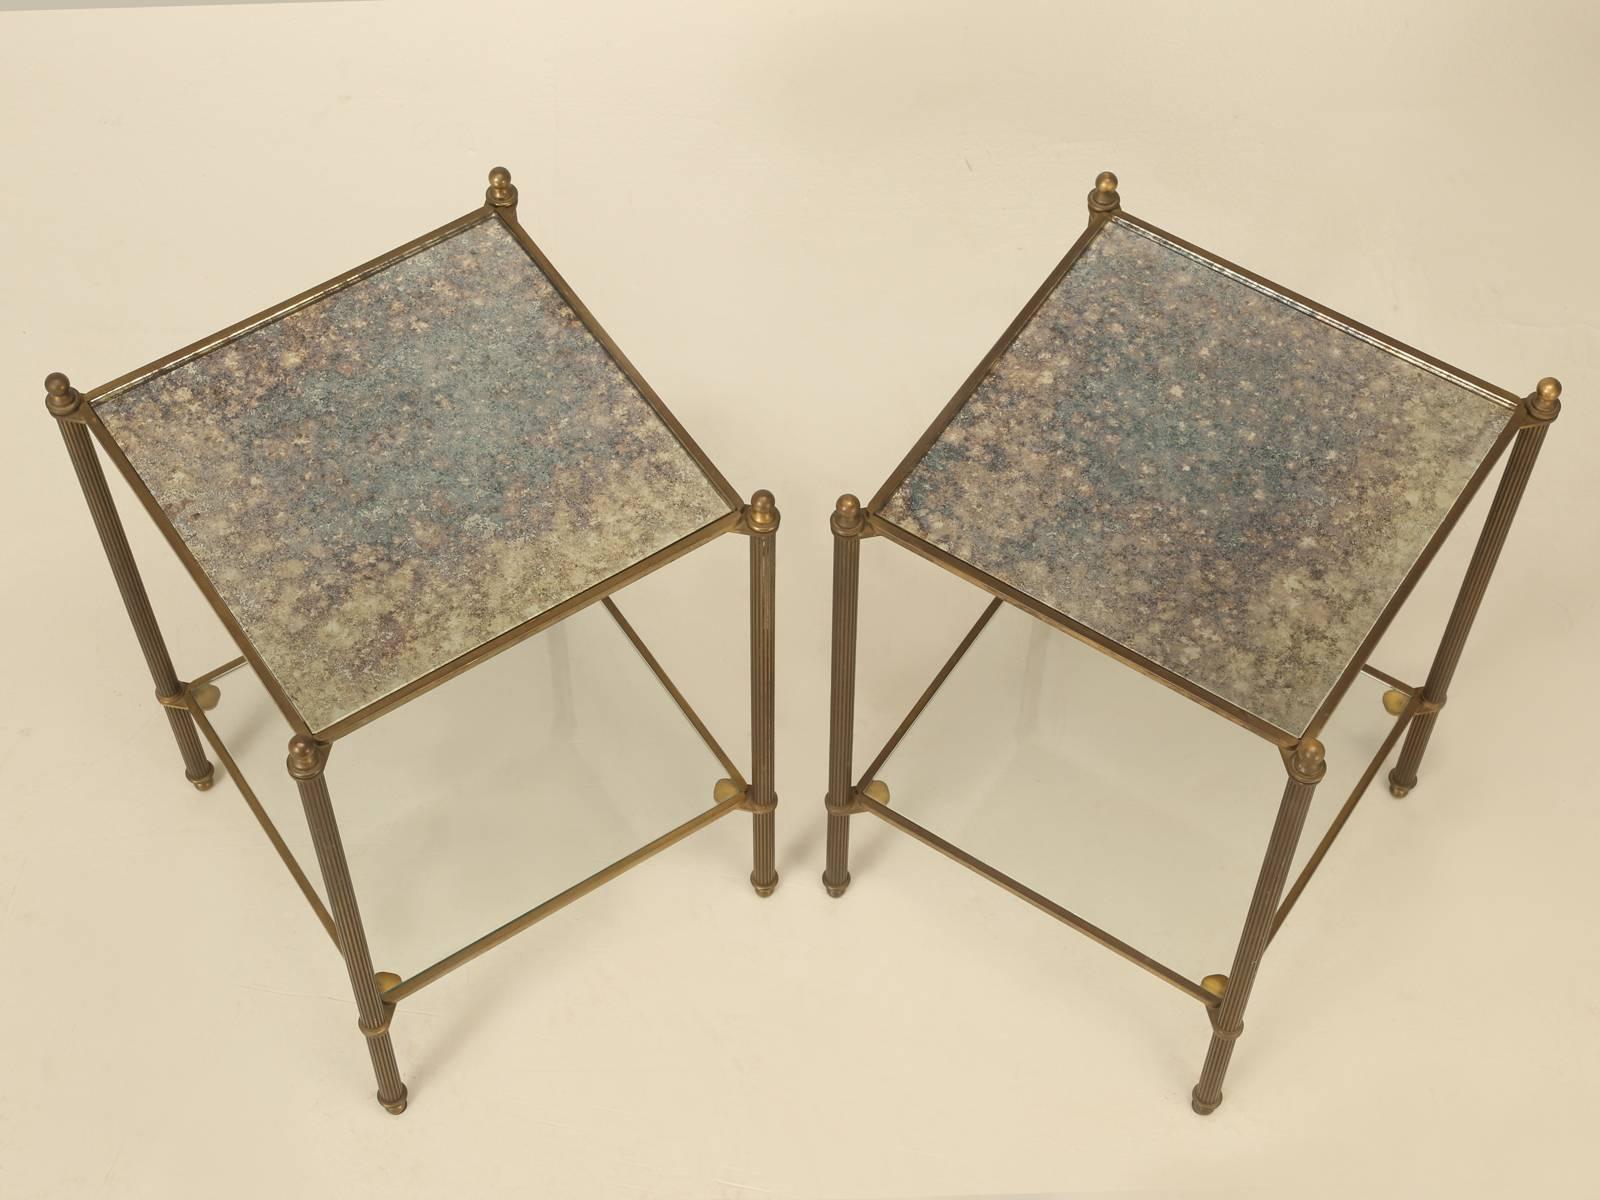 French Mid-Century Modern, pair of side tables, or if you prefer, end tables. These were purchased in the port town of Marseilles, France.

Height provided does not include the 1.25